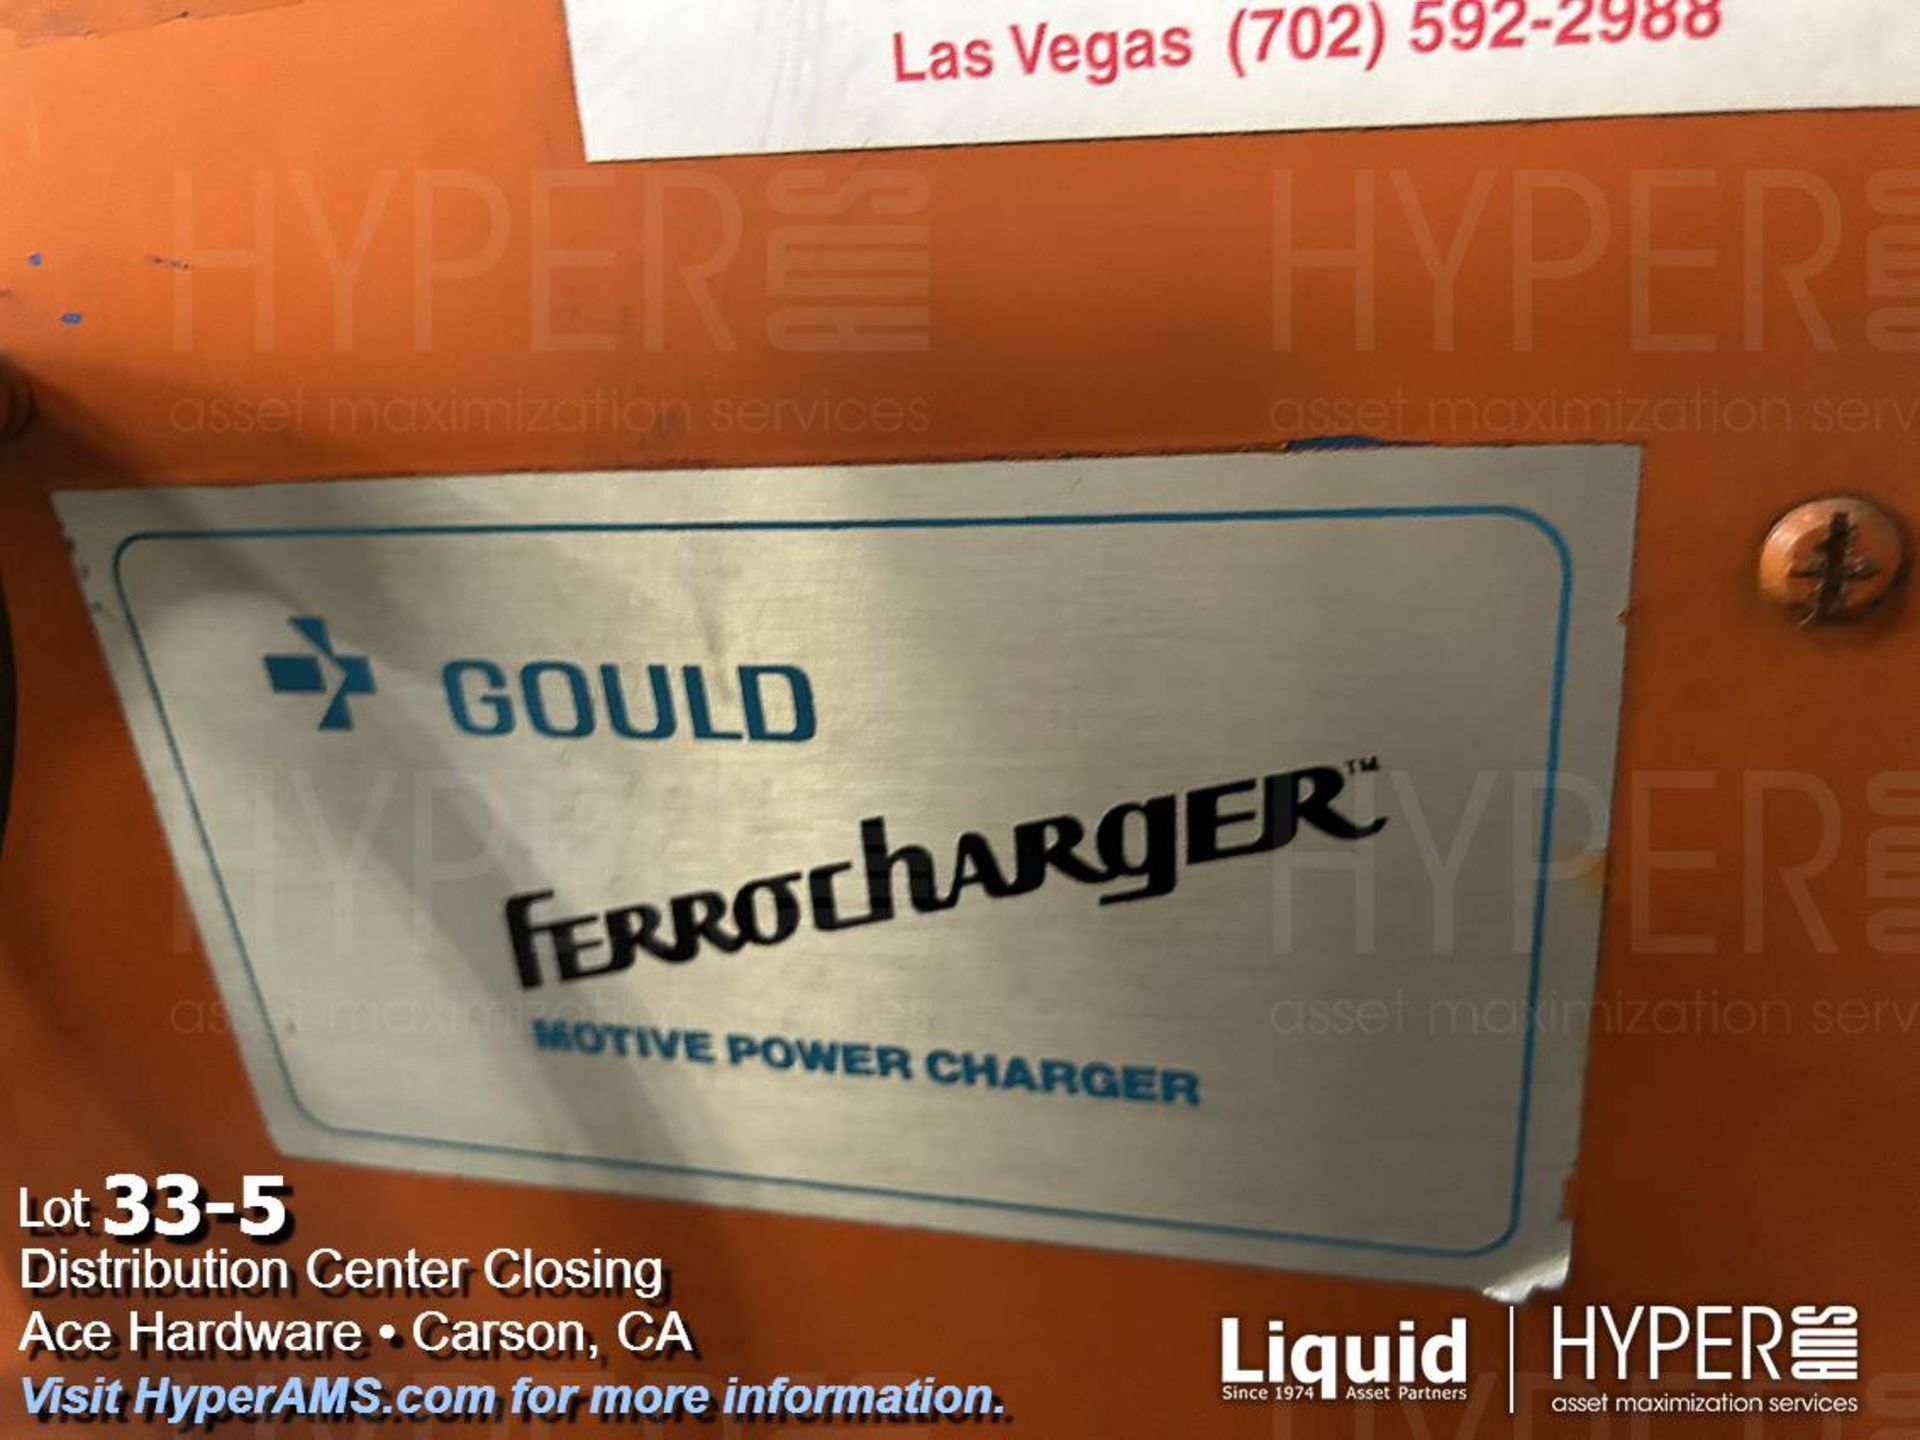 Gould Ferro 24v battery charger - Image 5 of 8